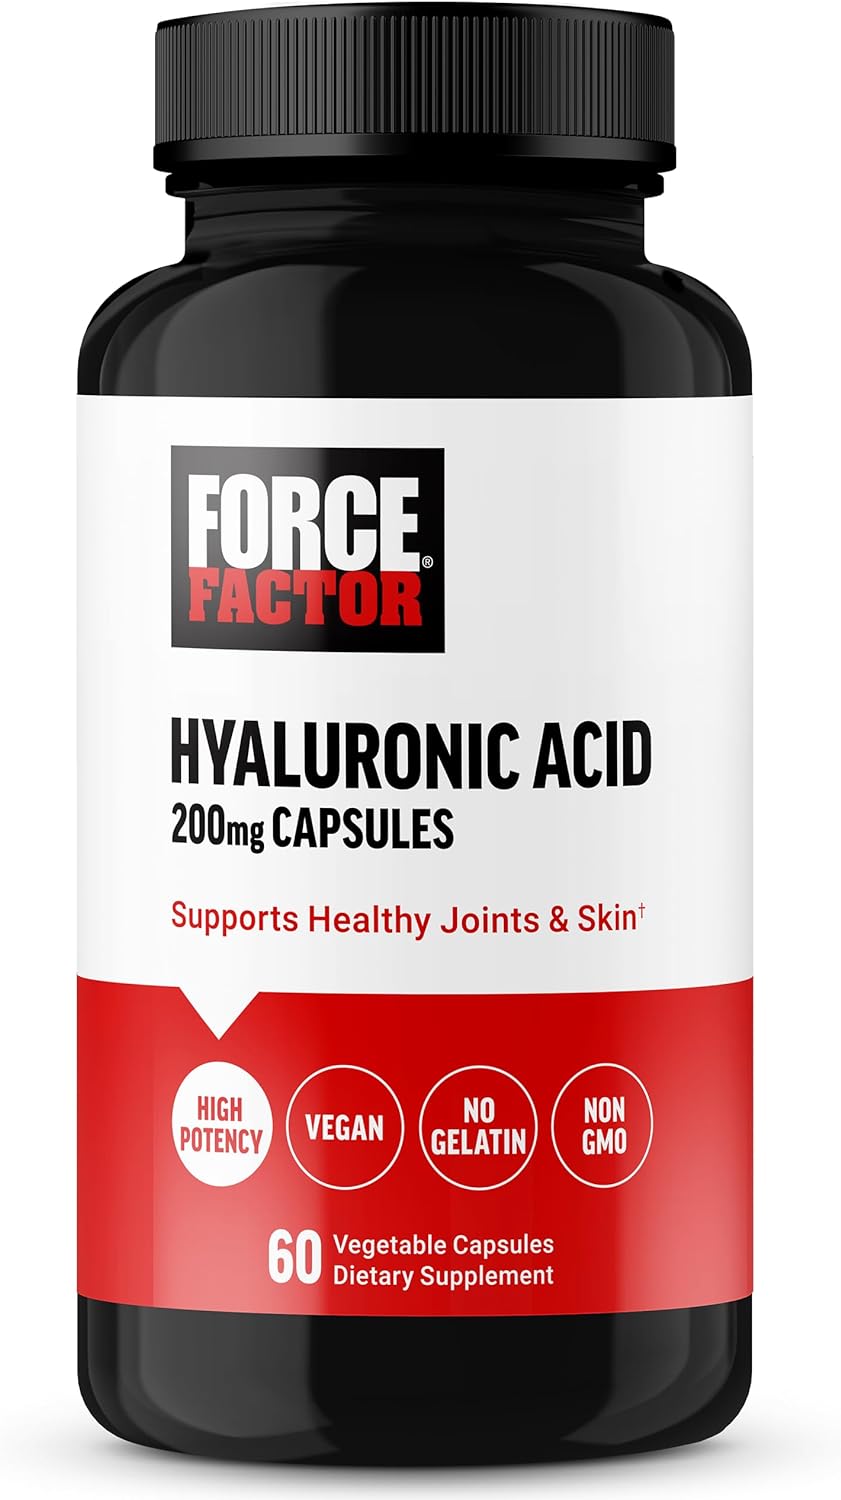 FORCE FACTOR Hyaluronic Acid Supplements, Hyaluronic Acid Capsules for Joint Health and Skin Hydration, Joint Health Supplement for Women and Men, High Potency, Vegan, 60 Capsules